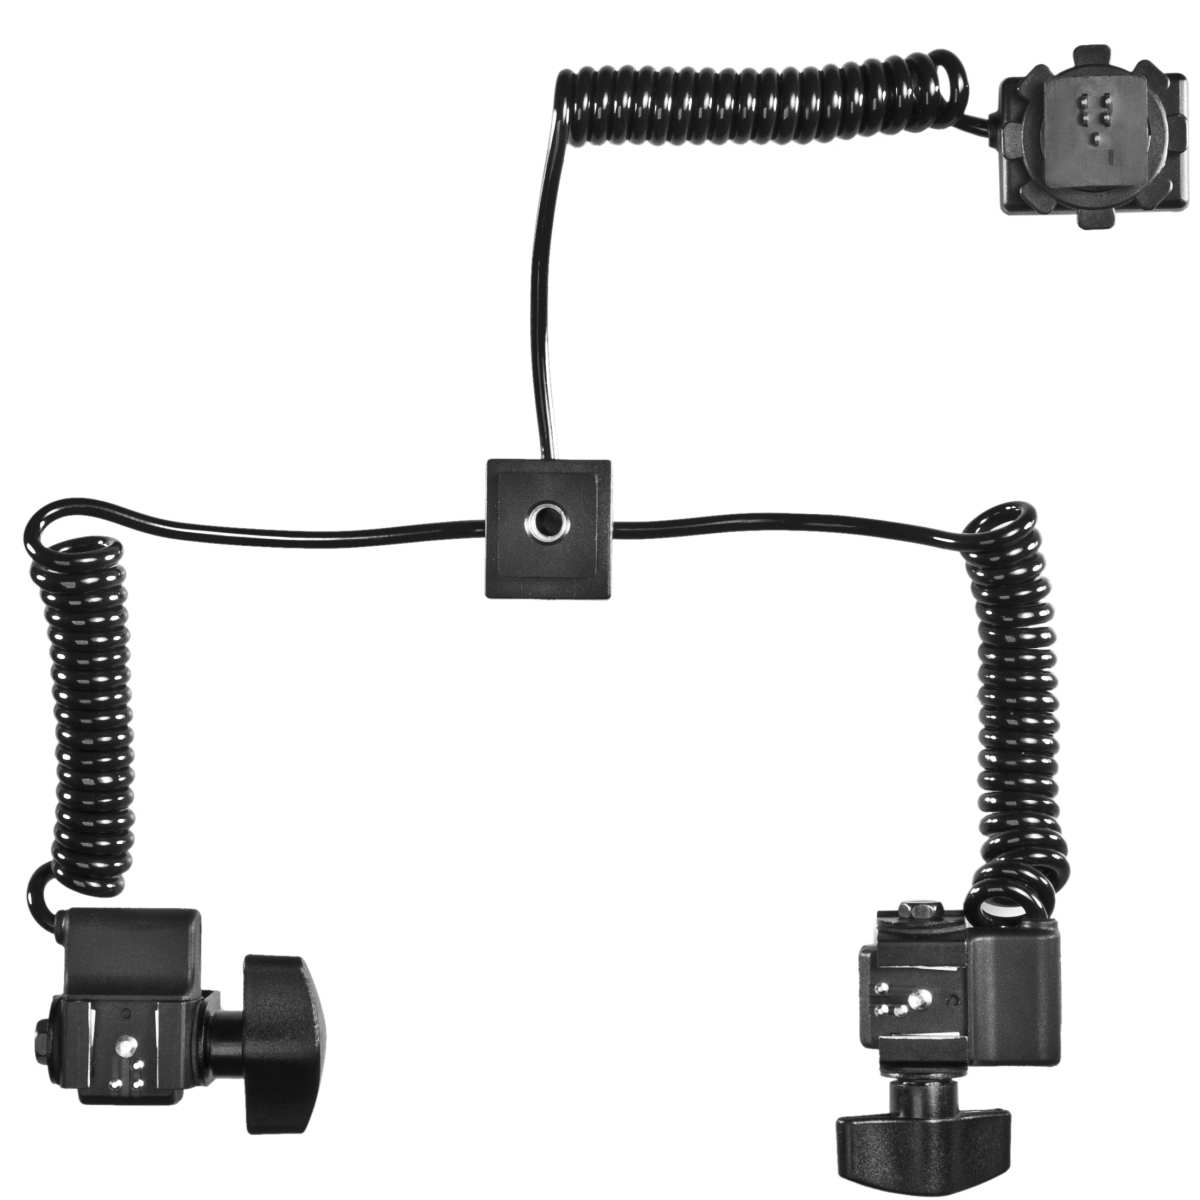 Walimex Double Spiral Flash Cable Olympus